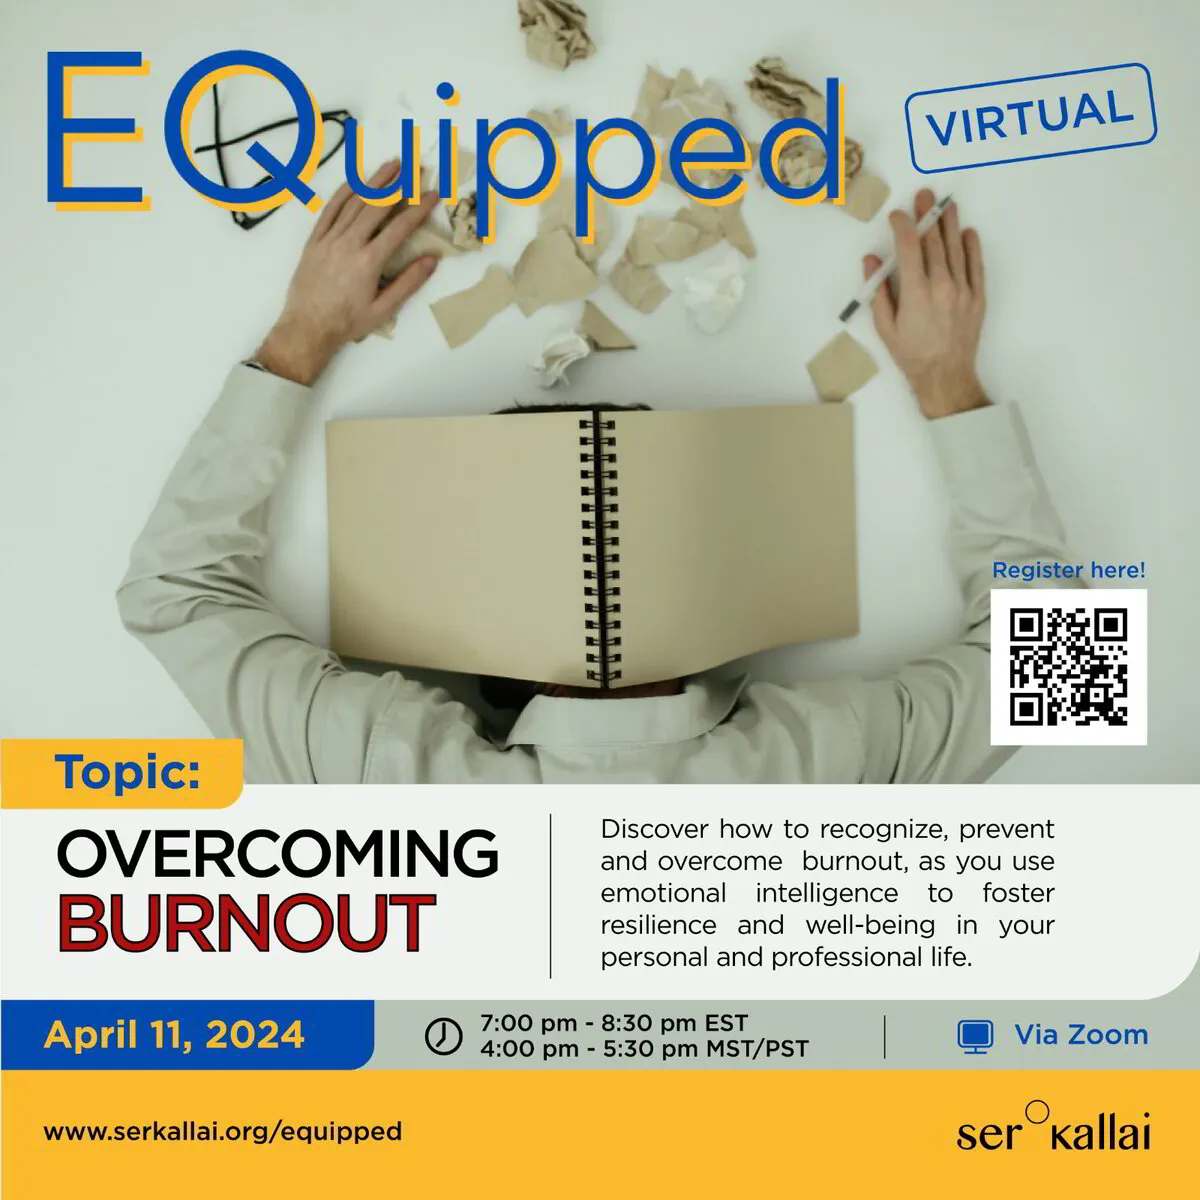 EQuipped - Overcoming Burnout (Virtual)